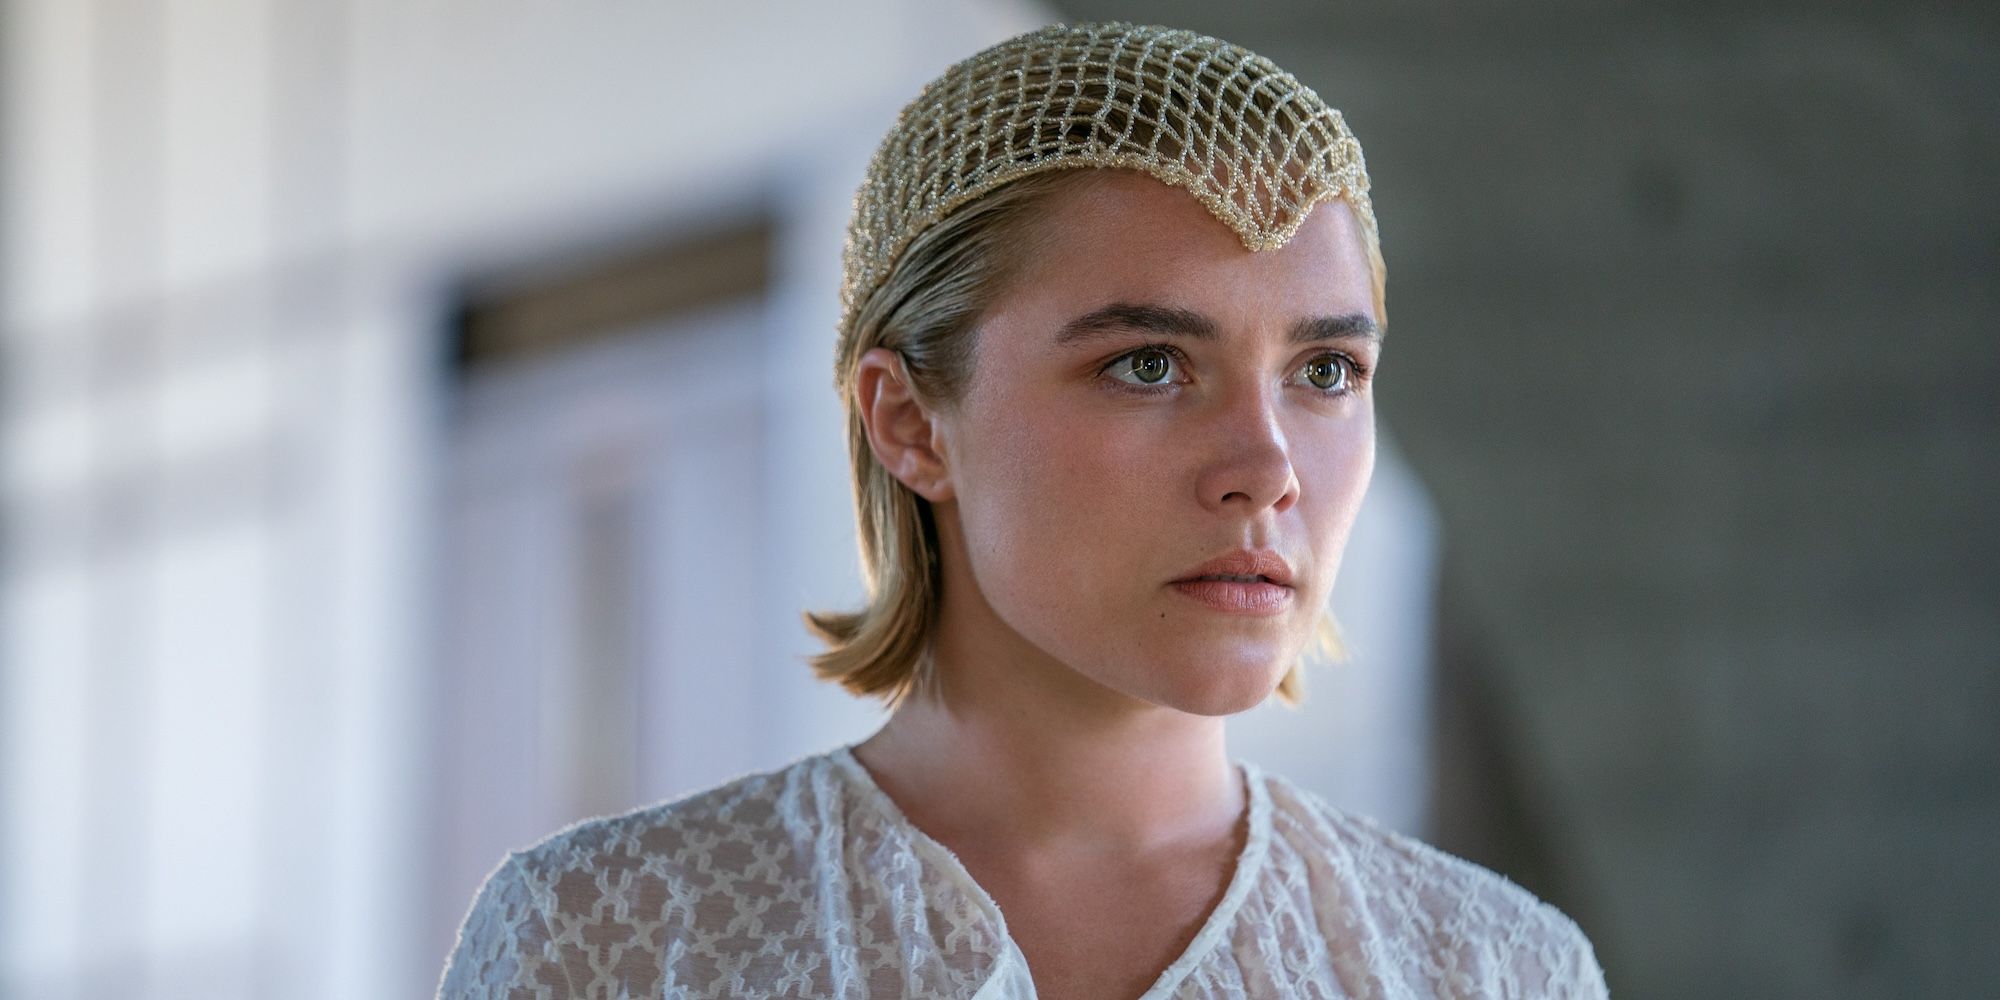 Florence Pugh's Princess Irulan wearing a white blouse and looking concerned in Dune 2